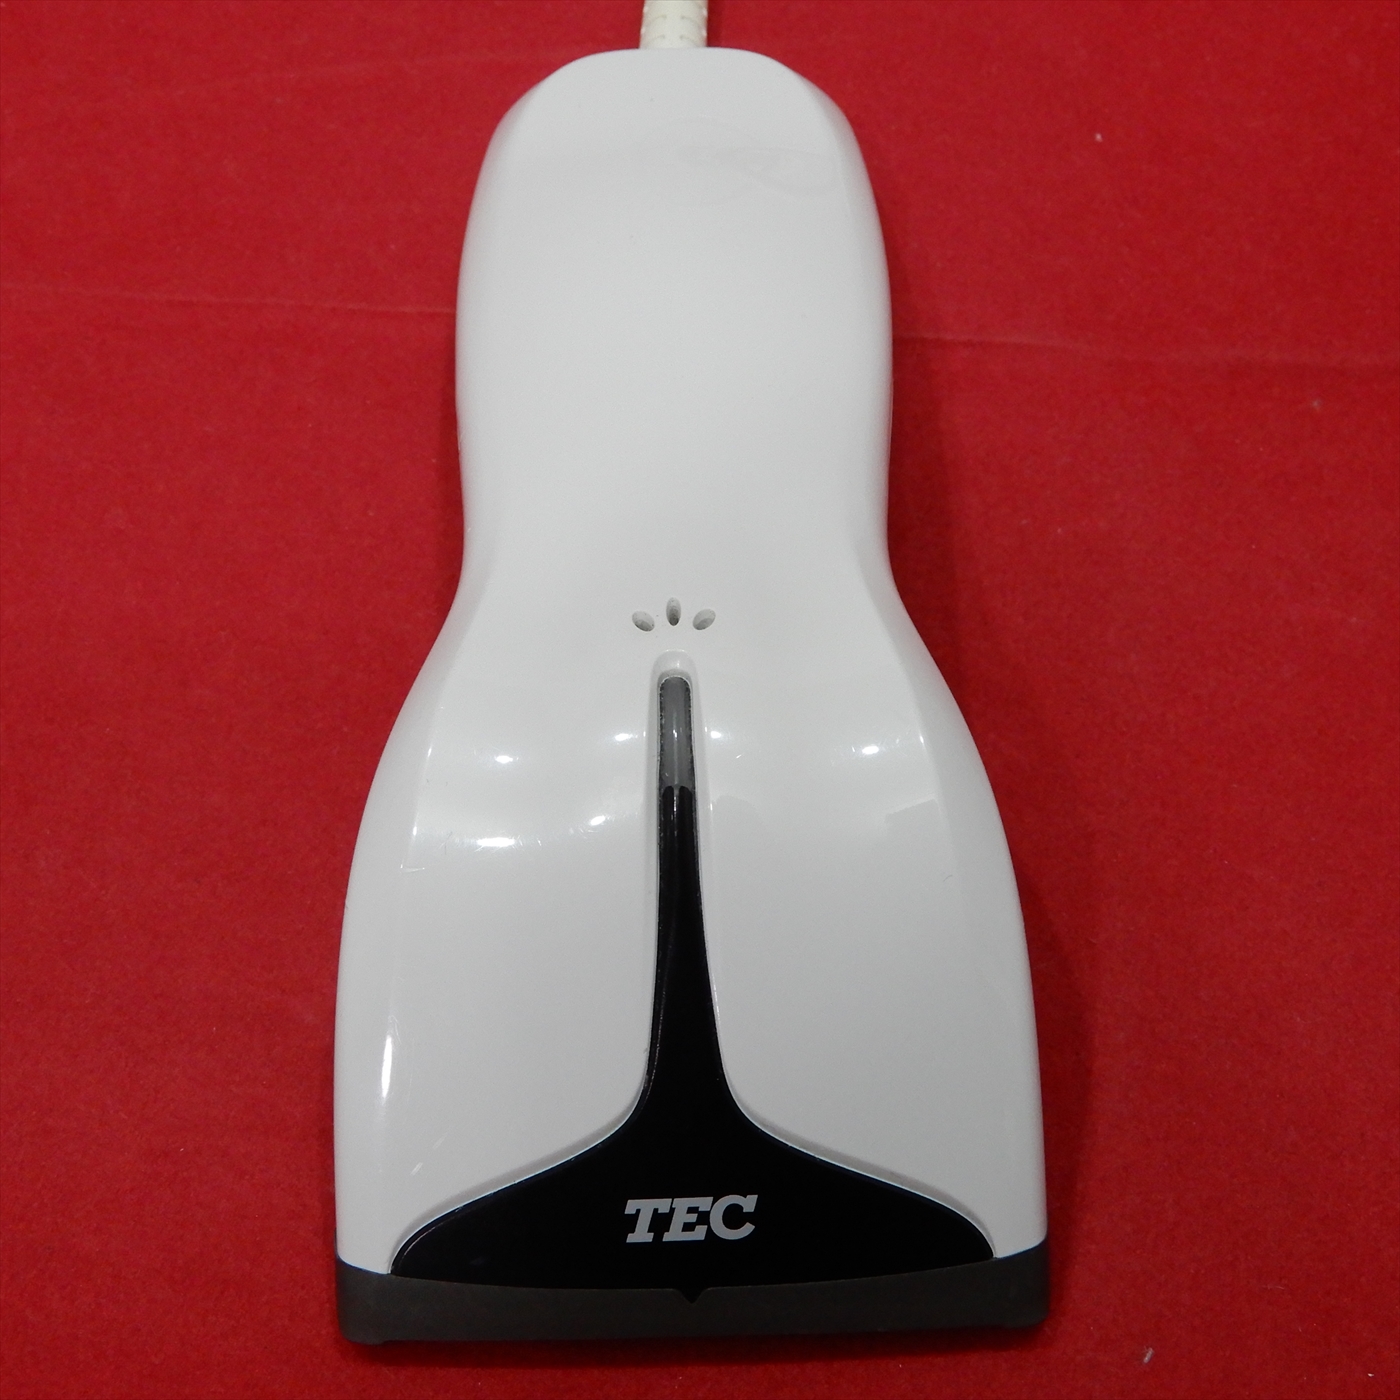 TEC HS-560-UB barcode hand scanner USB connection NO.231128008